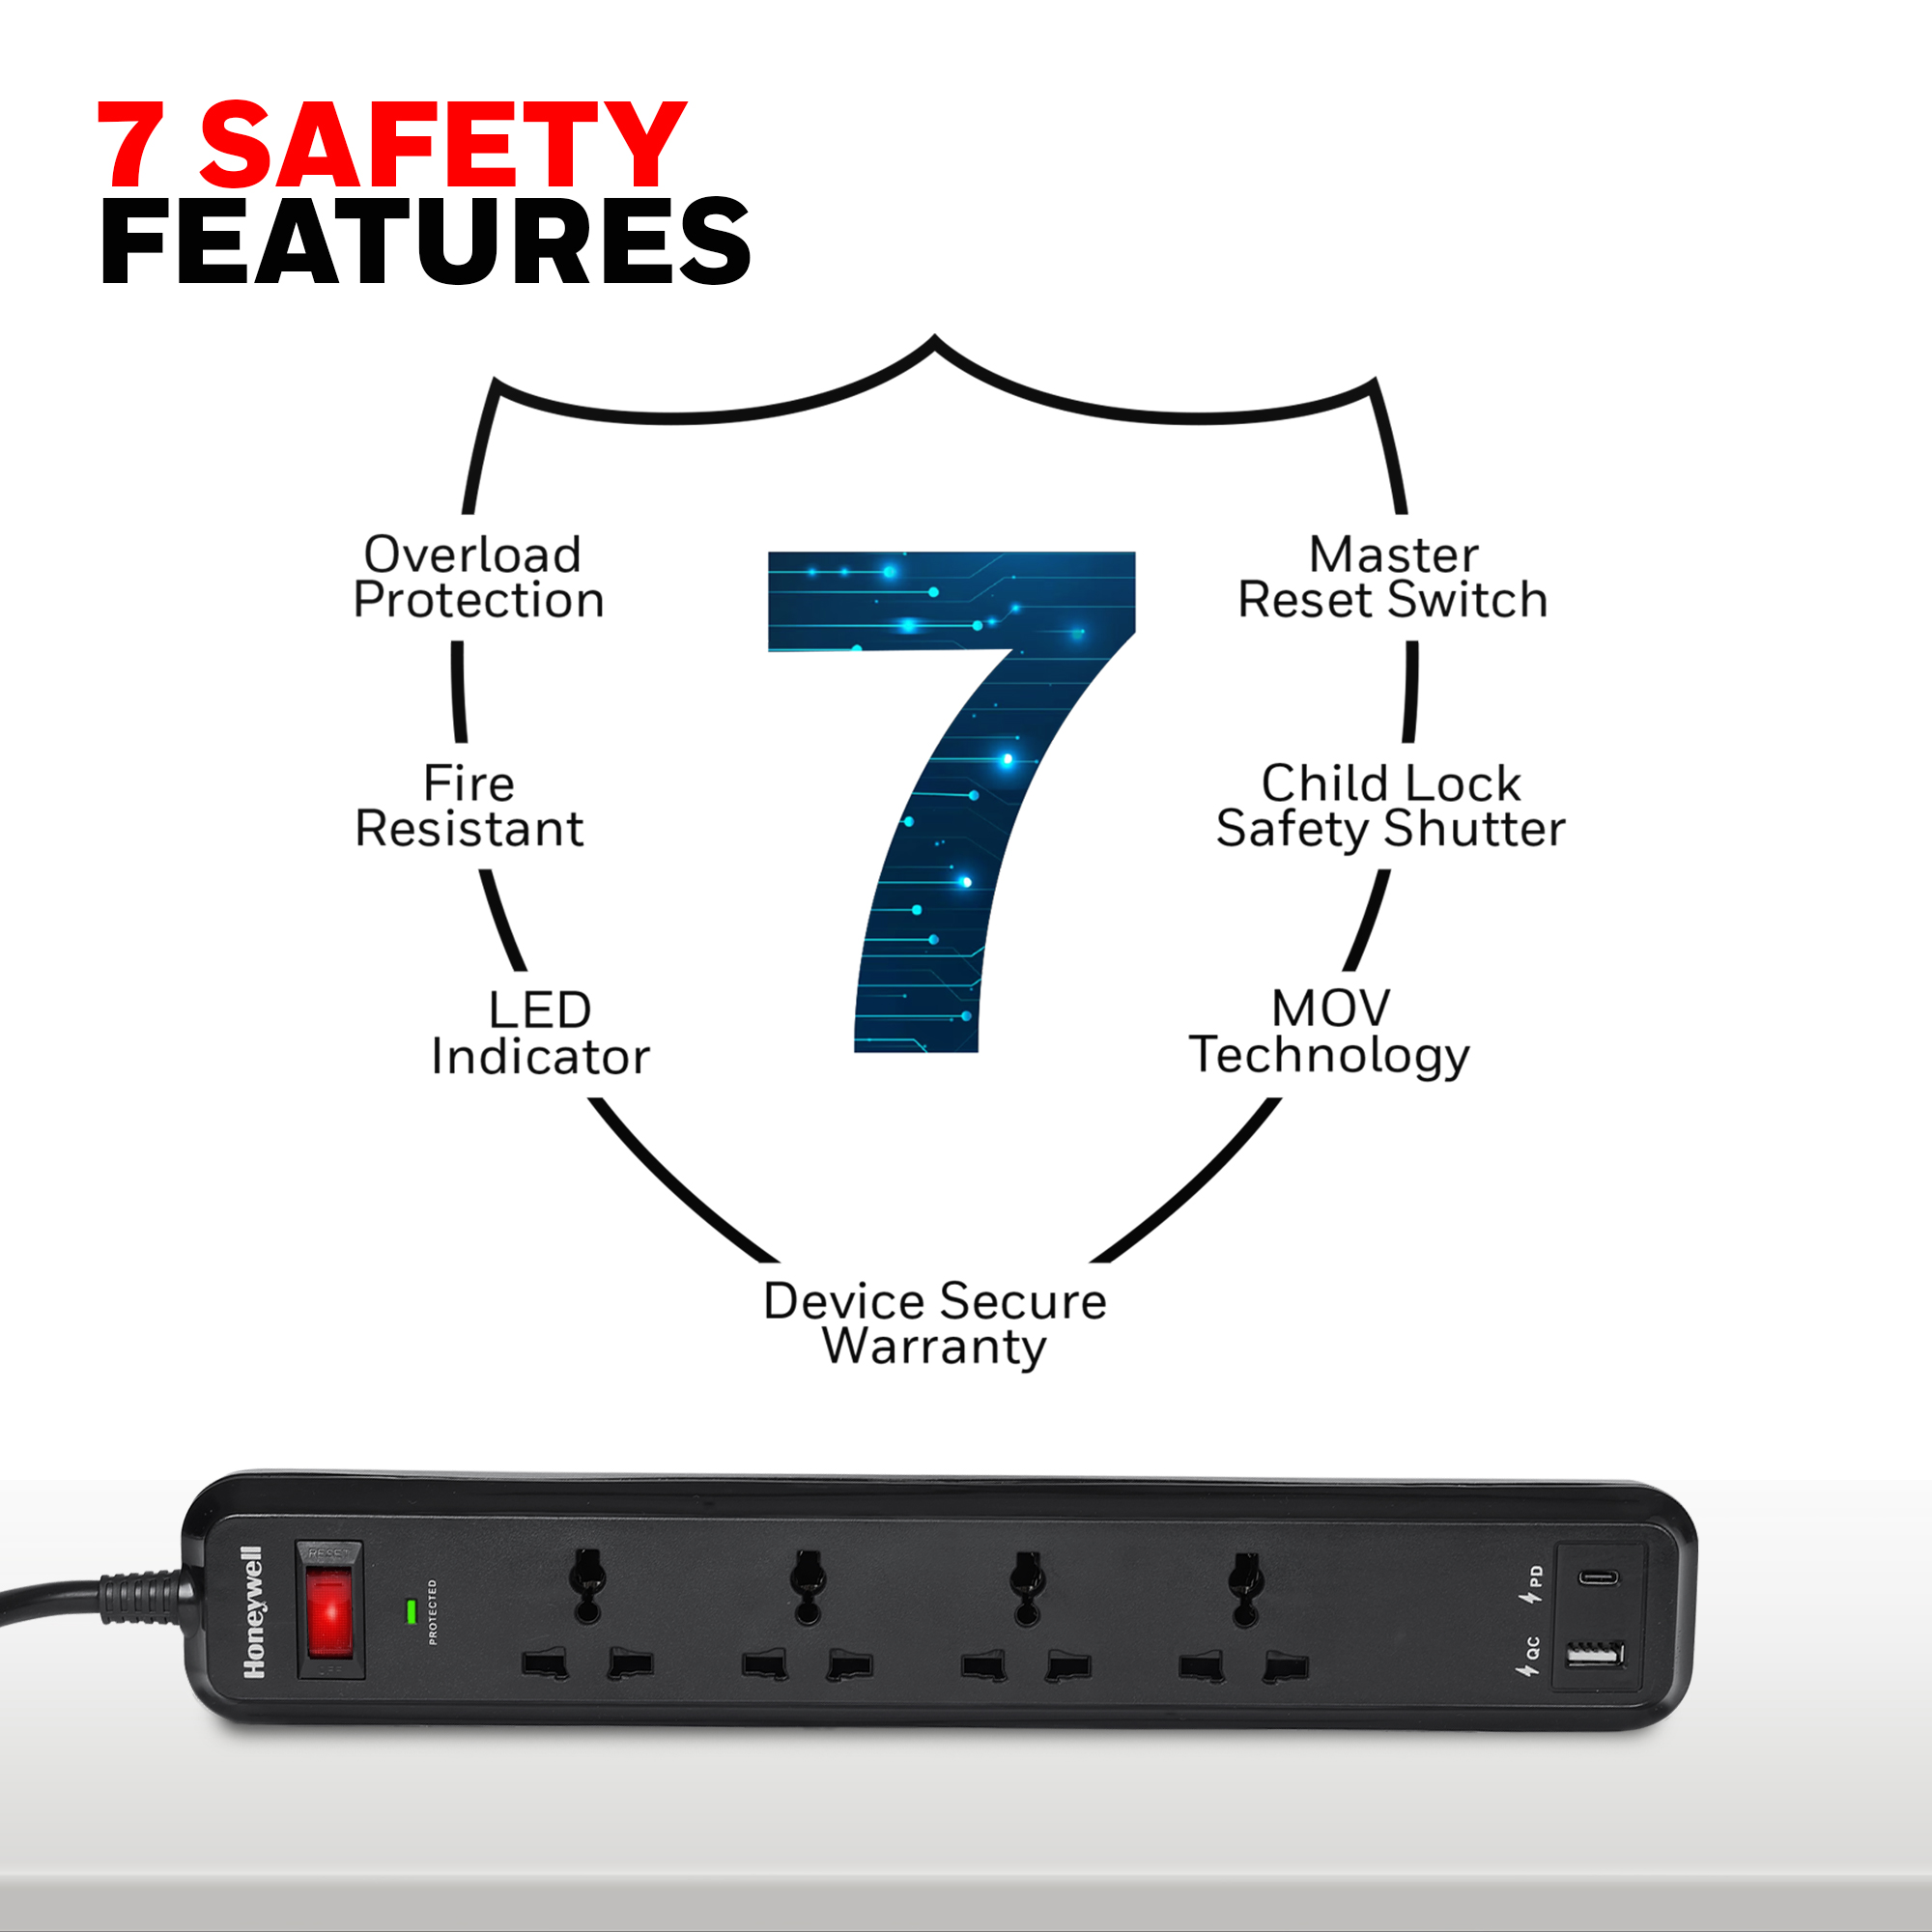 Honeywell Surge Protector with 4 Universal Sockets + USB-A, Type C and 2 Meter Cord - Black